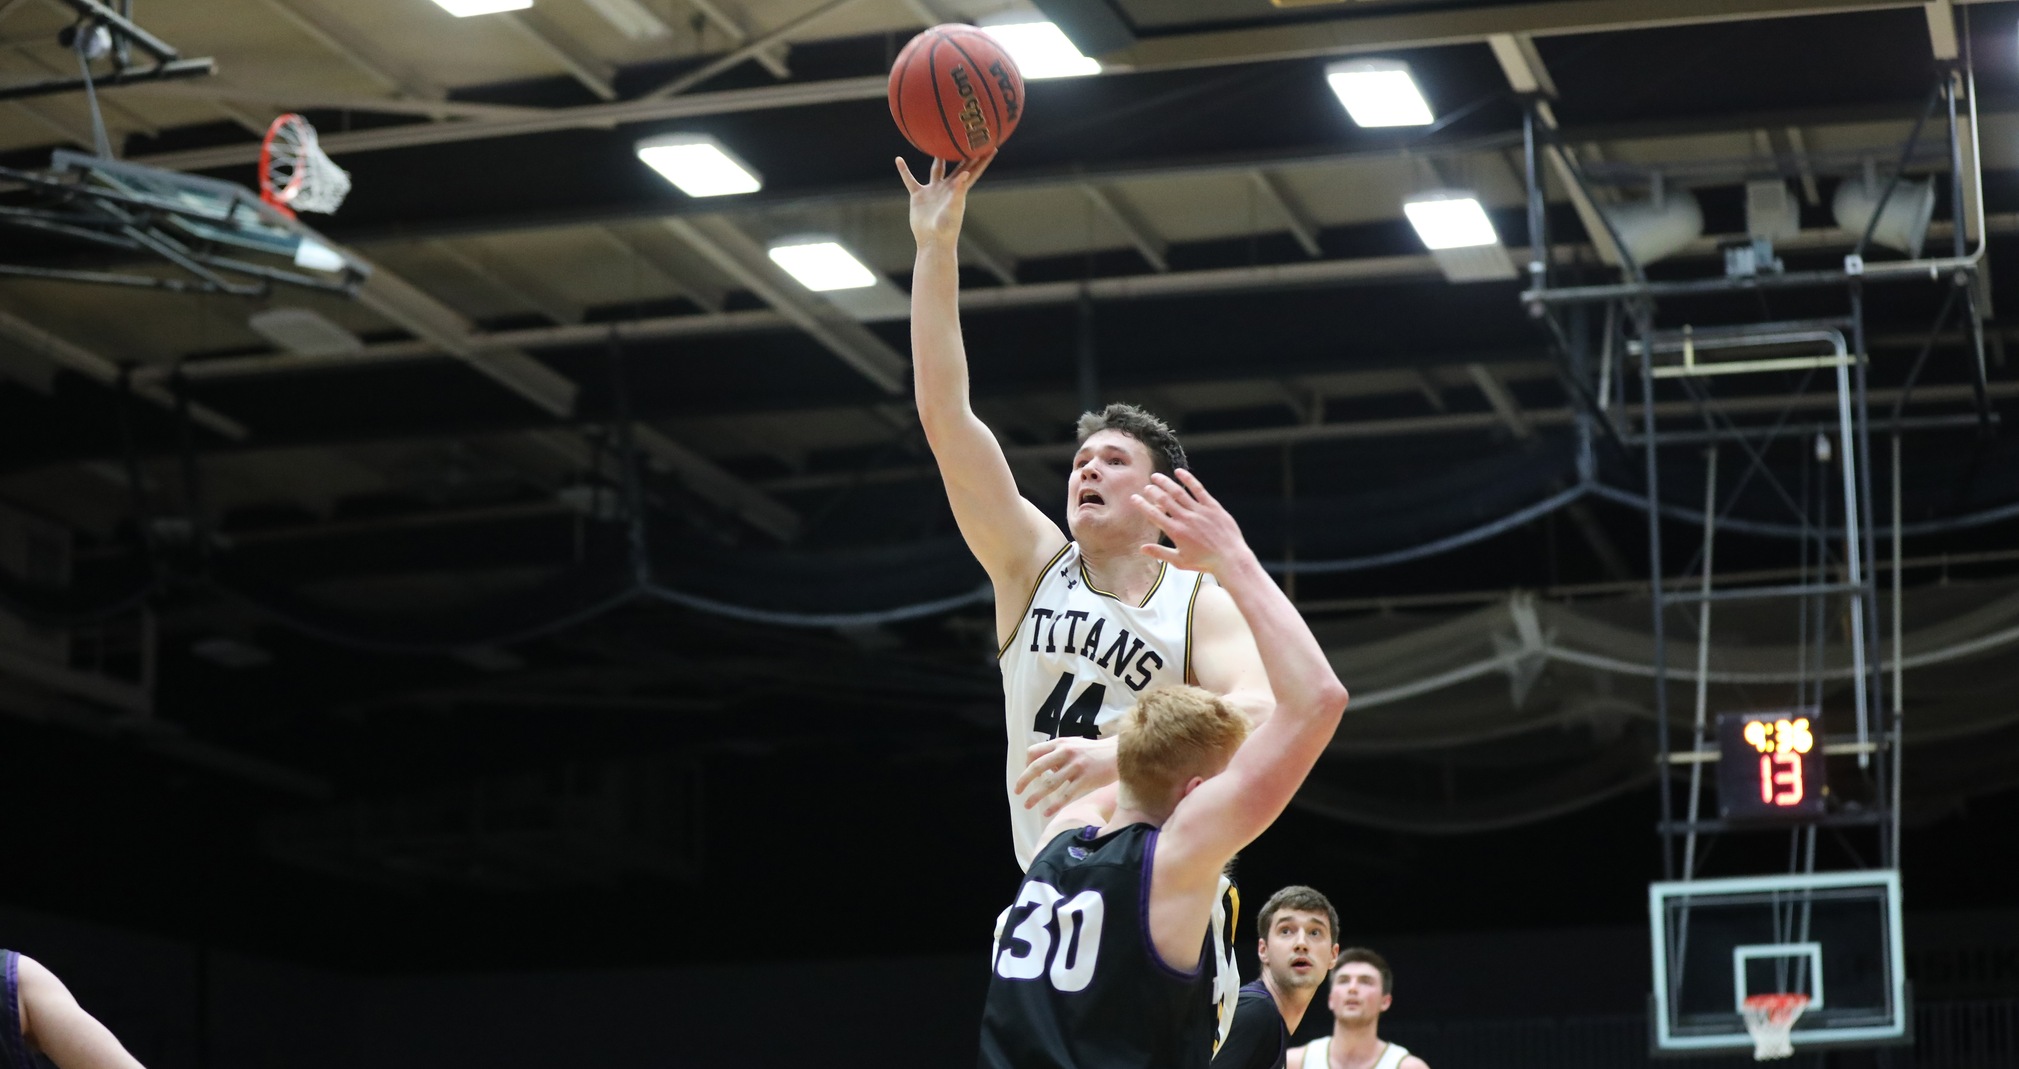 Jack Flynn scored 16 points and grabbed 13 rebounds against the Pioneers after intermission.